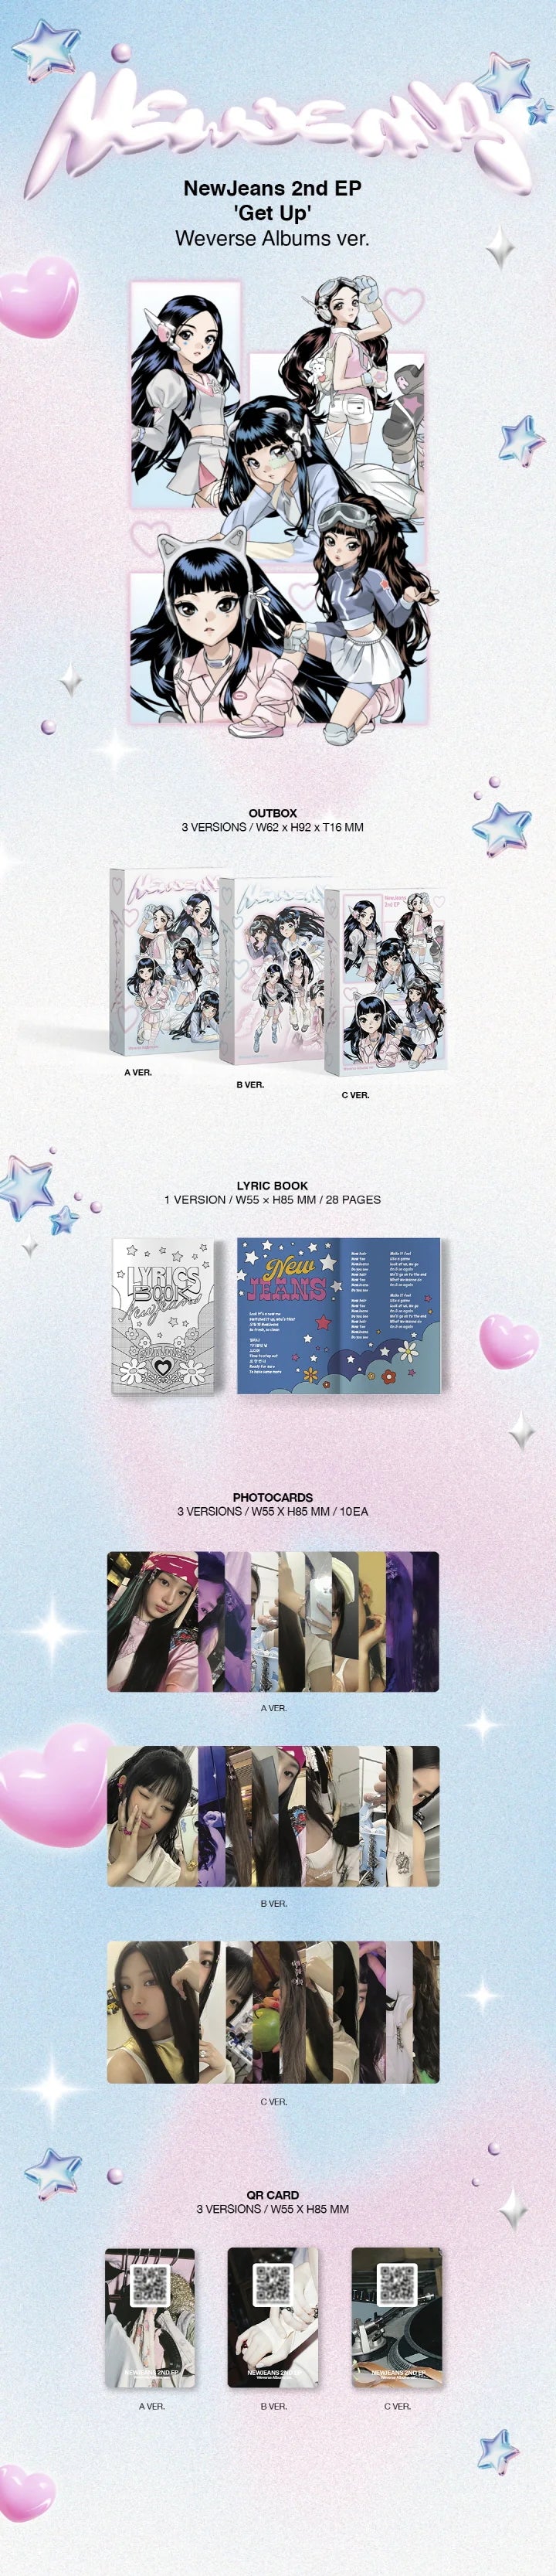 NEWJEANS - 2ND EP ALBUM GET UP WEVERSE FORMAT ALBUM Infographic